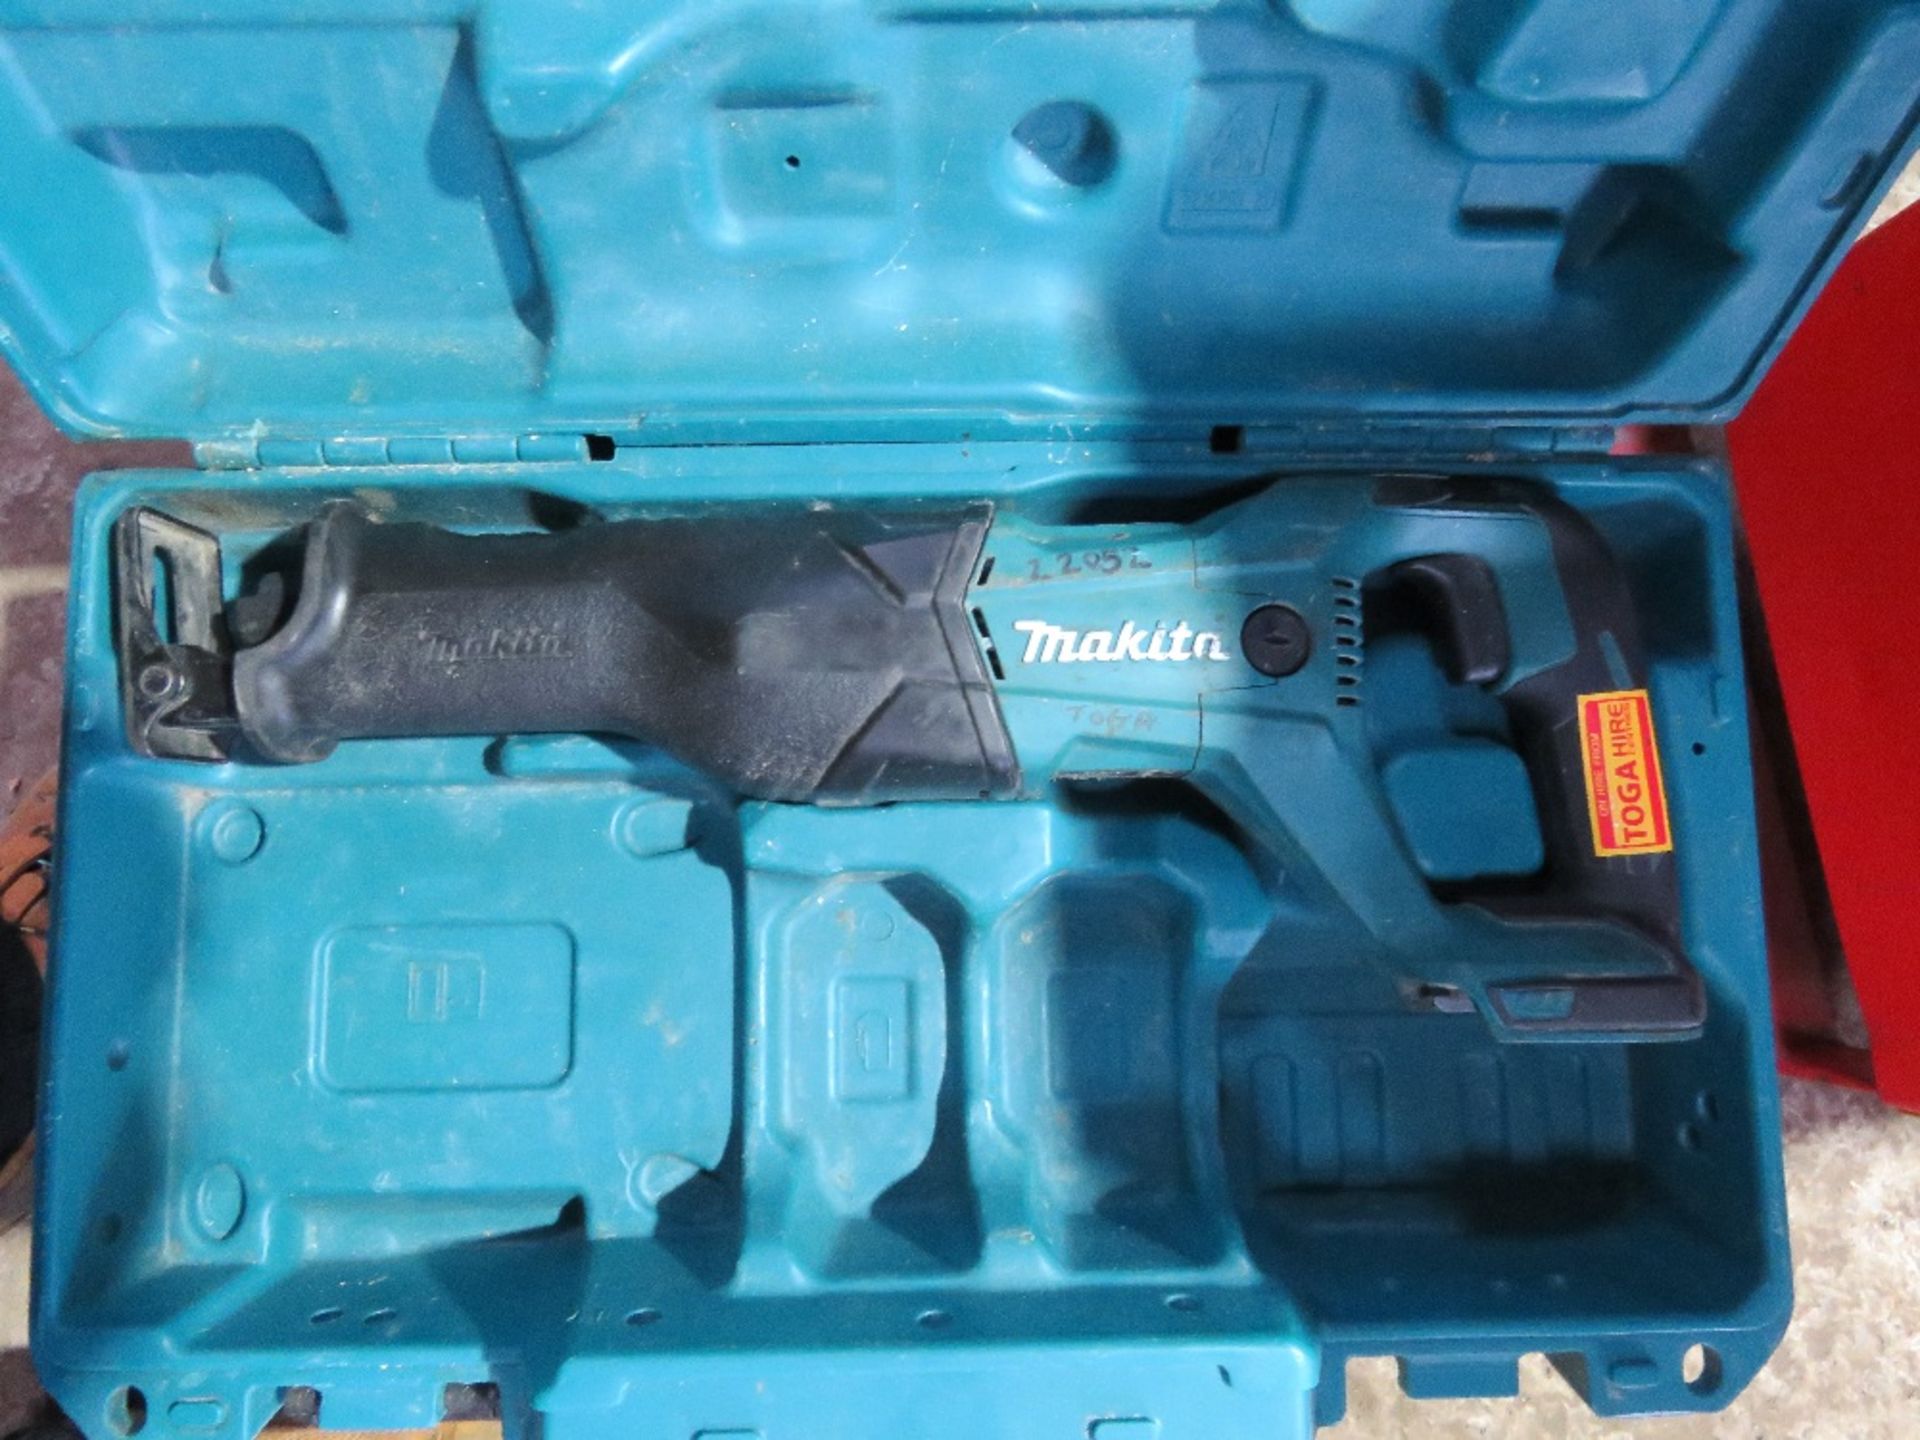 3 X MAKITA BATTERY POWER TOOLS, INCOMPLETE: GRINDER, RECIP SAW, DRILL. - Image 3 of 4